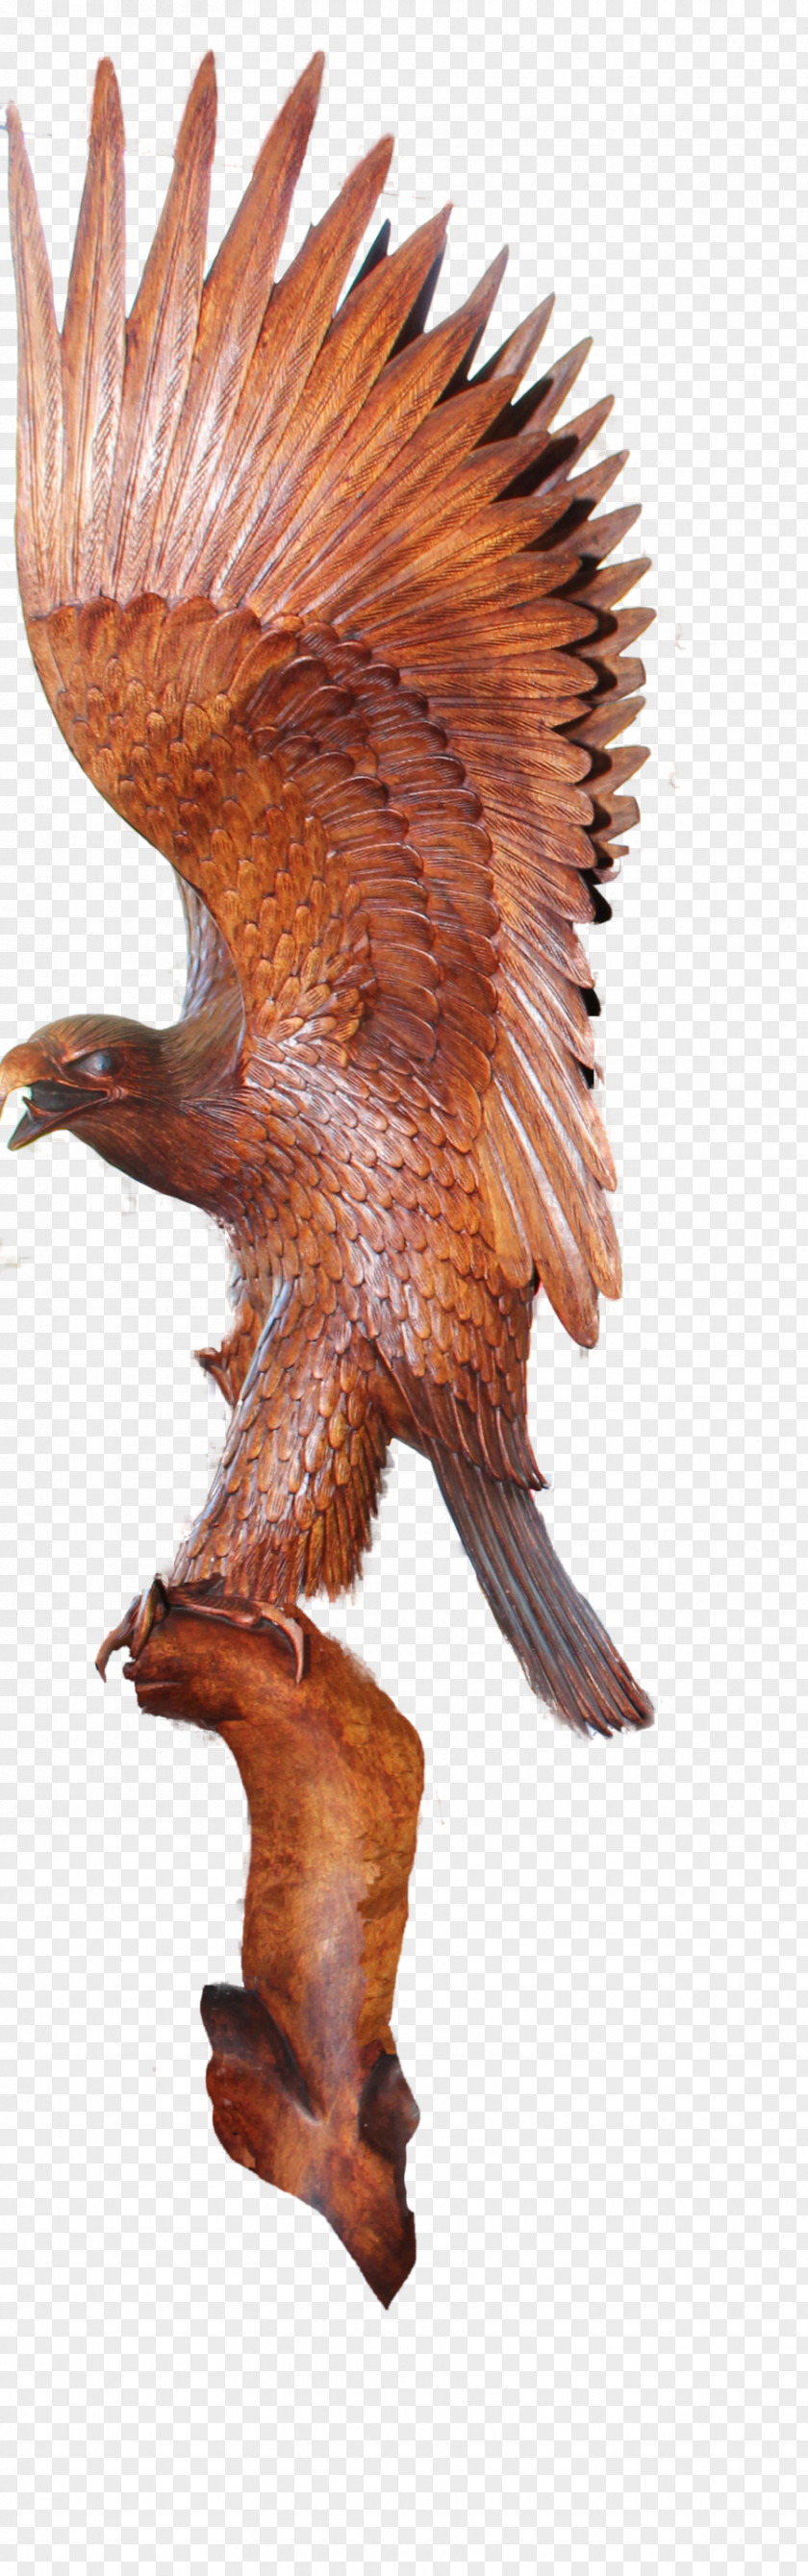 Carving Patterns Wood Sculpture Craft PNG